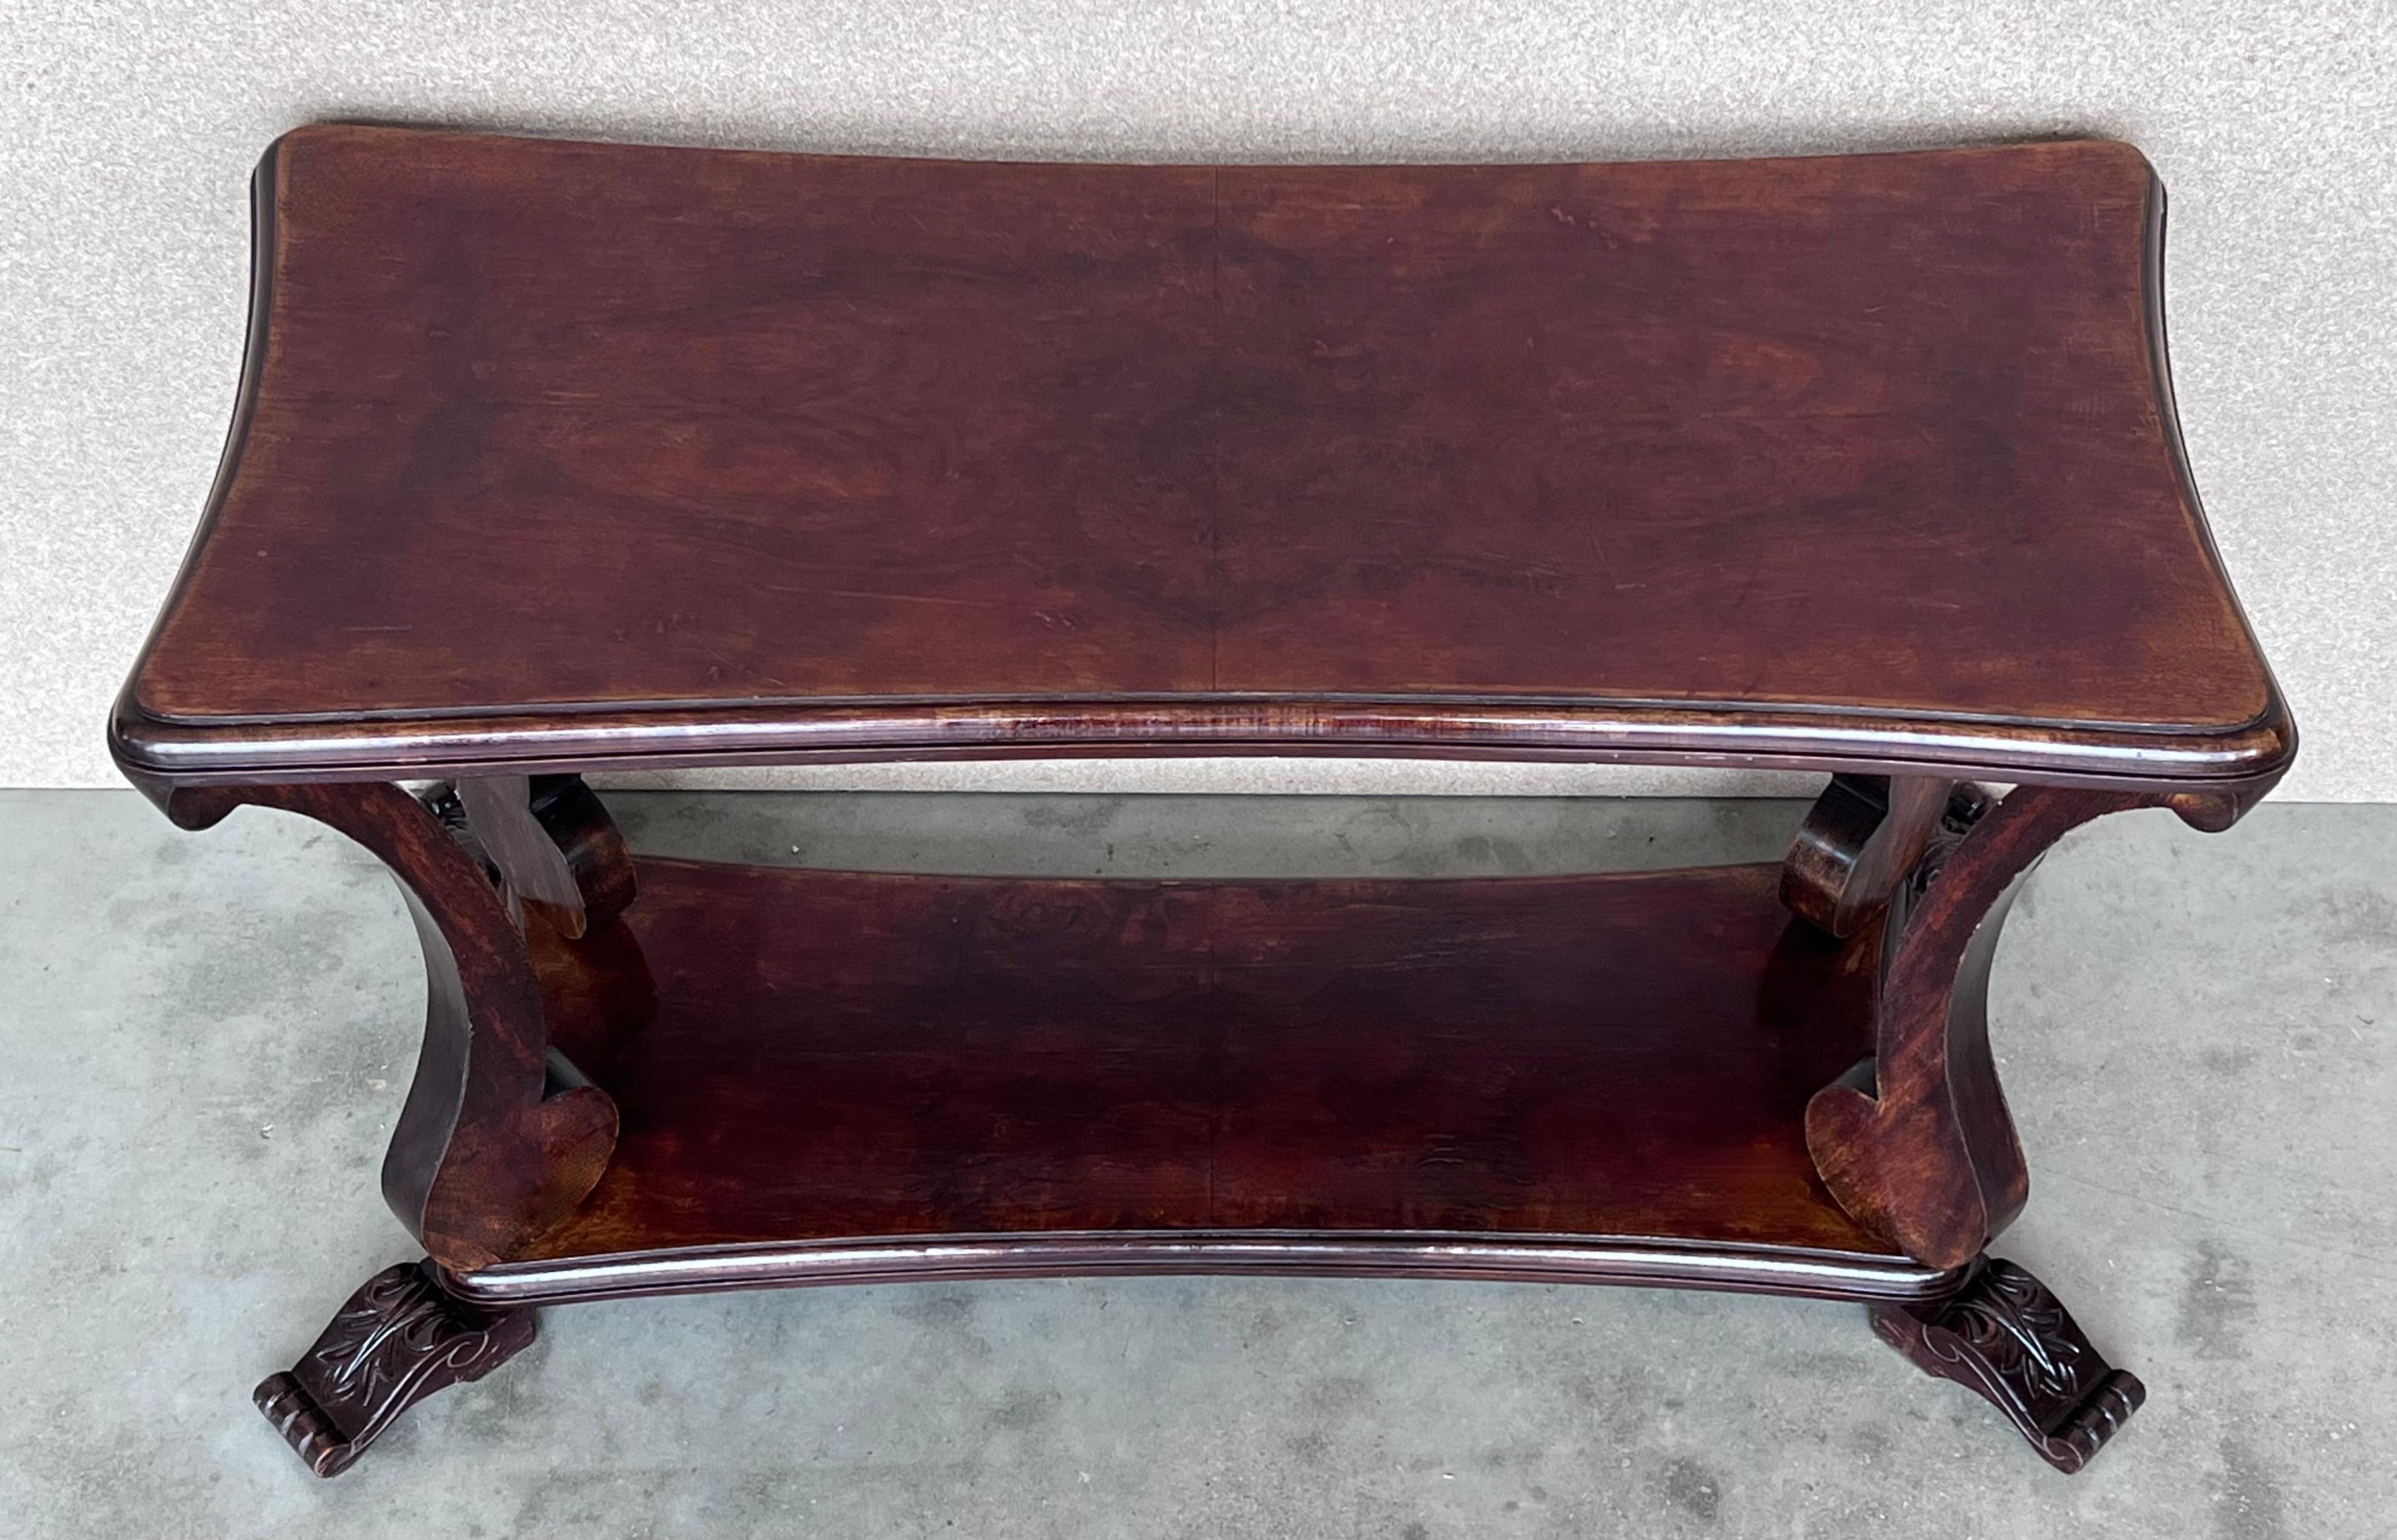 Early 20th Century Mahogany Rectangular Coffee Table with Low Shelve In Good Condition For Sale In Miami, FL